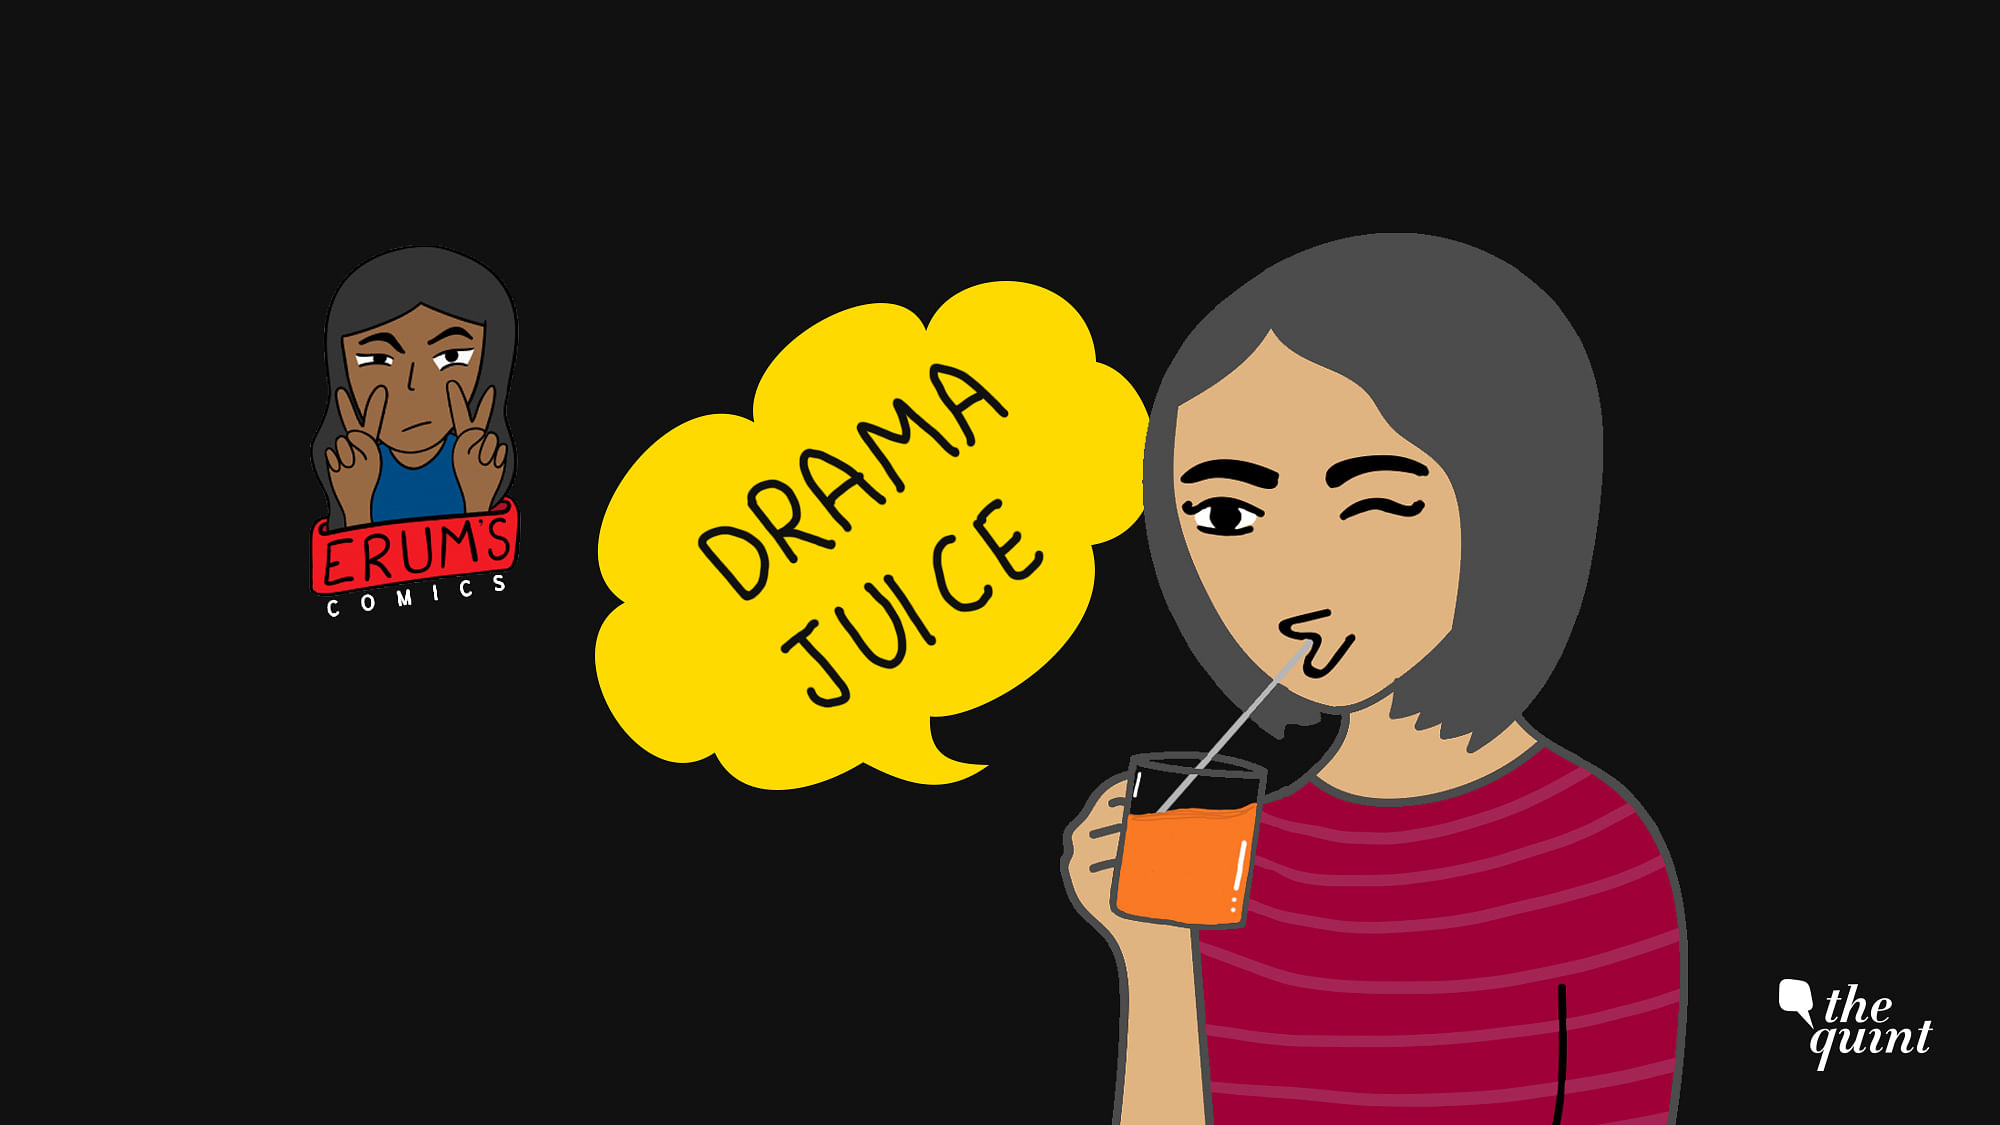 What is life without some drama juice?